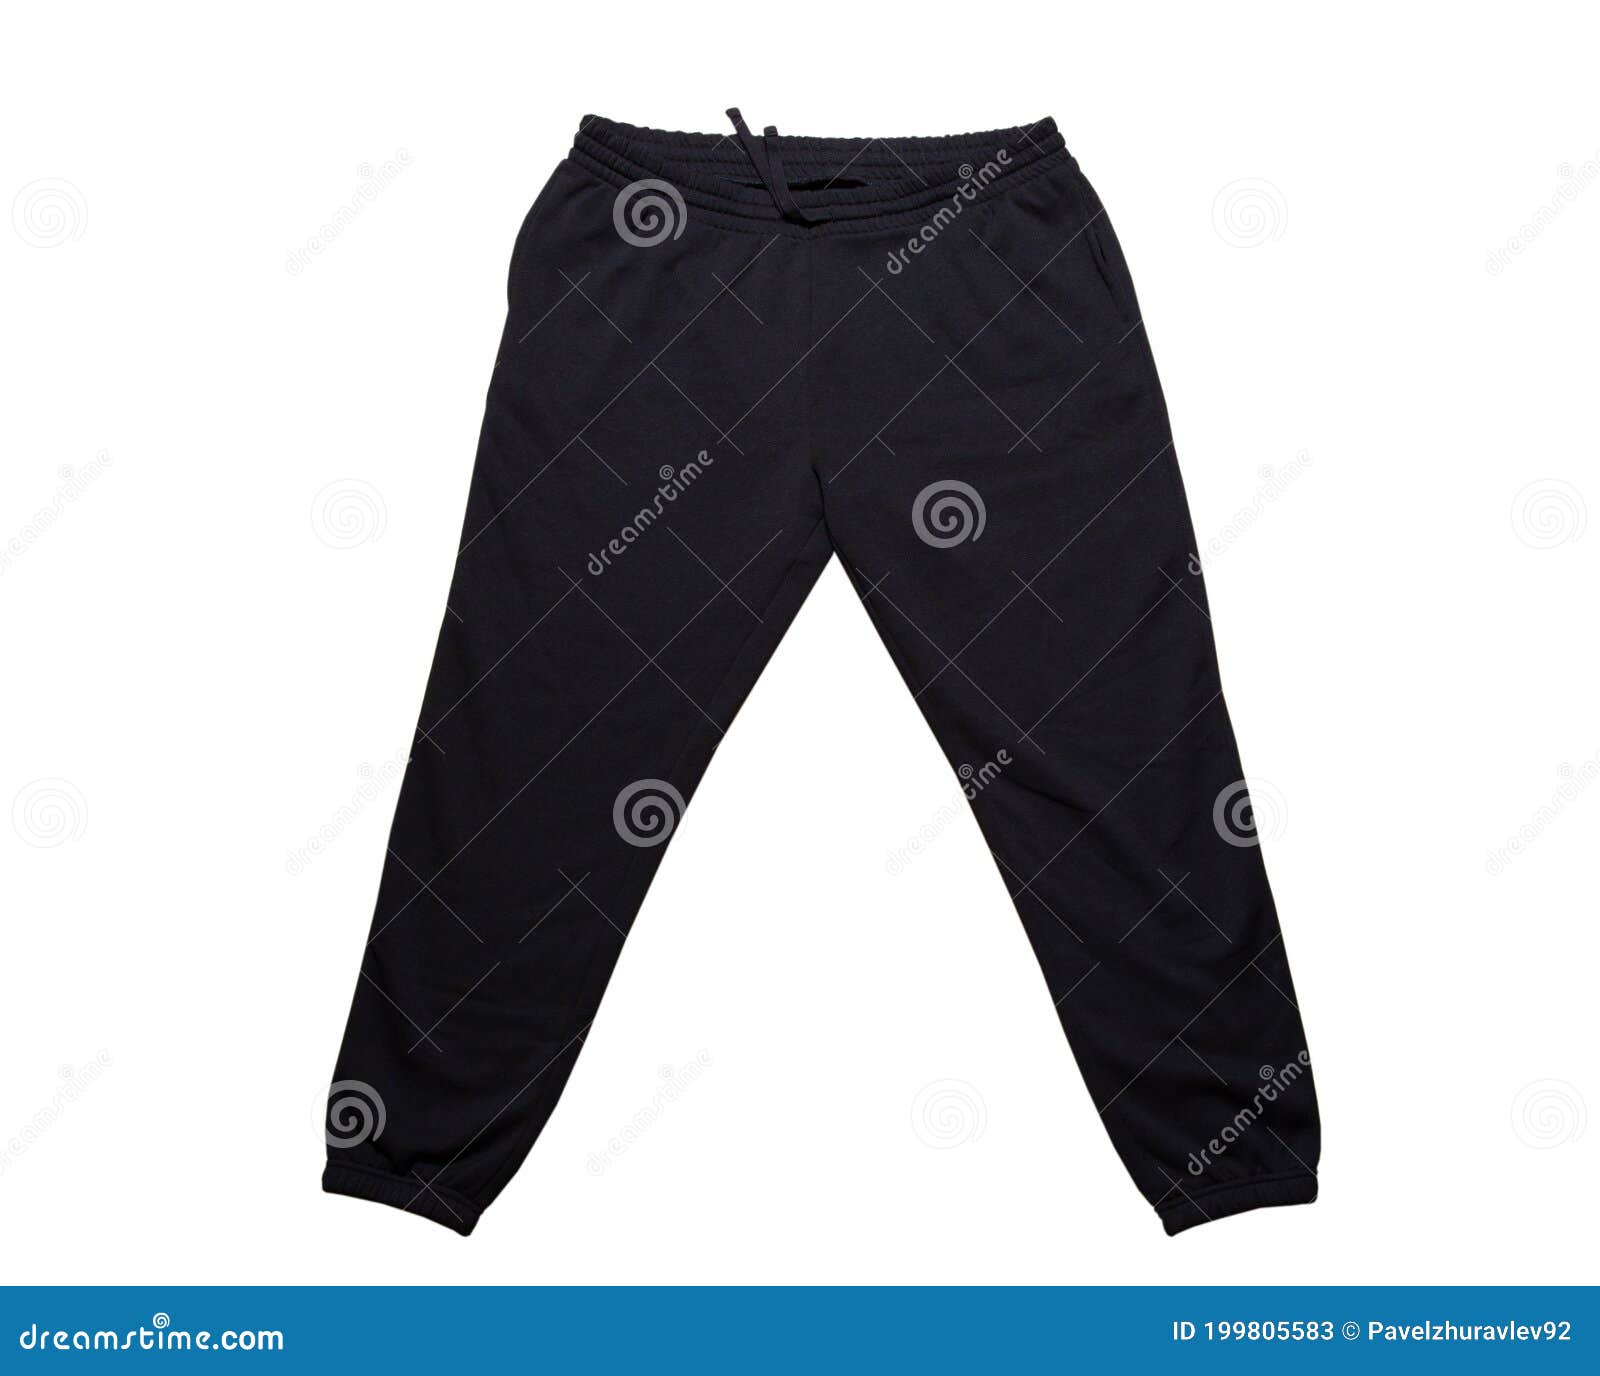 Male Sweatpants Over White Background Copy Space Stock Image - Image of ...